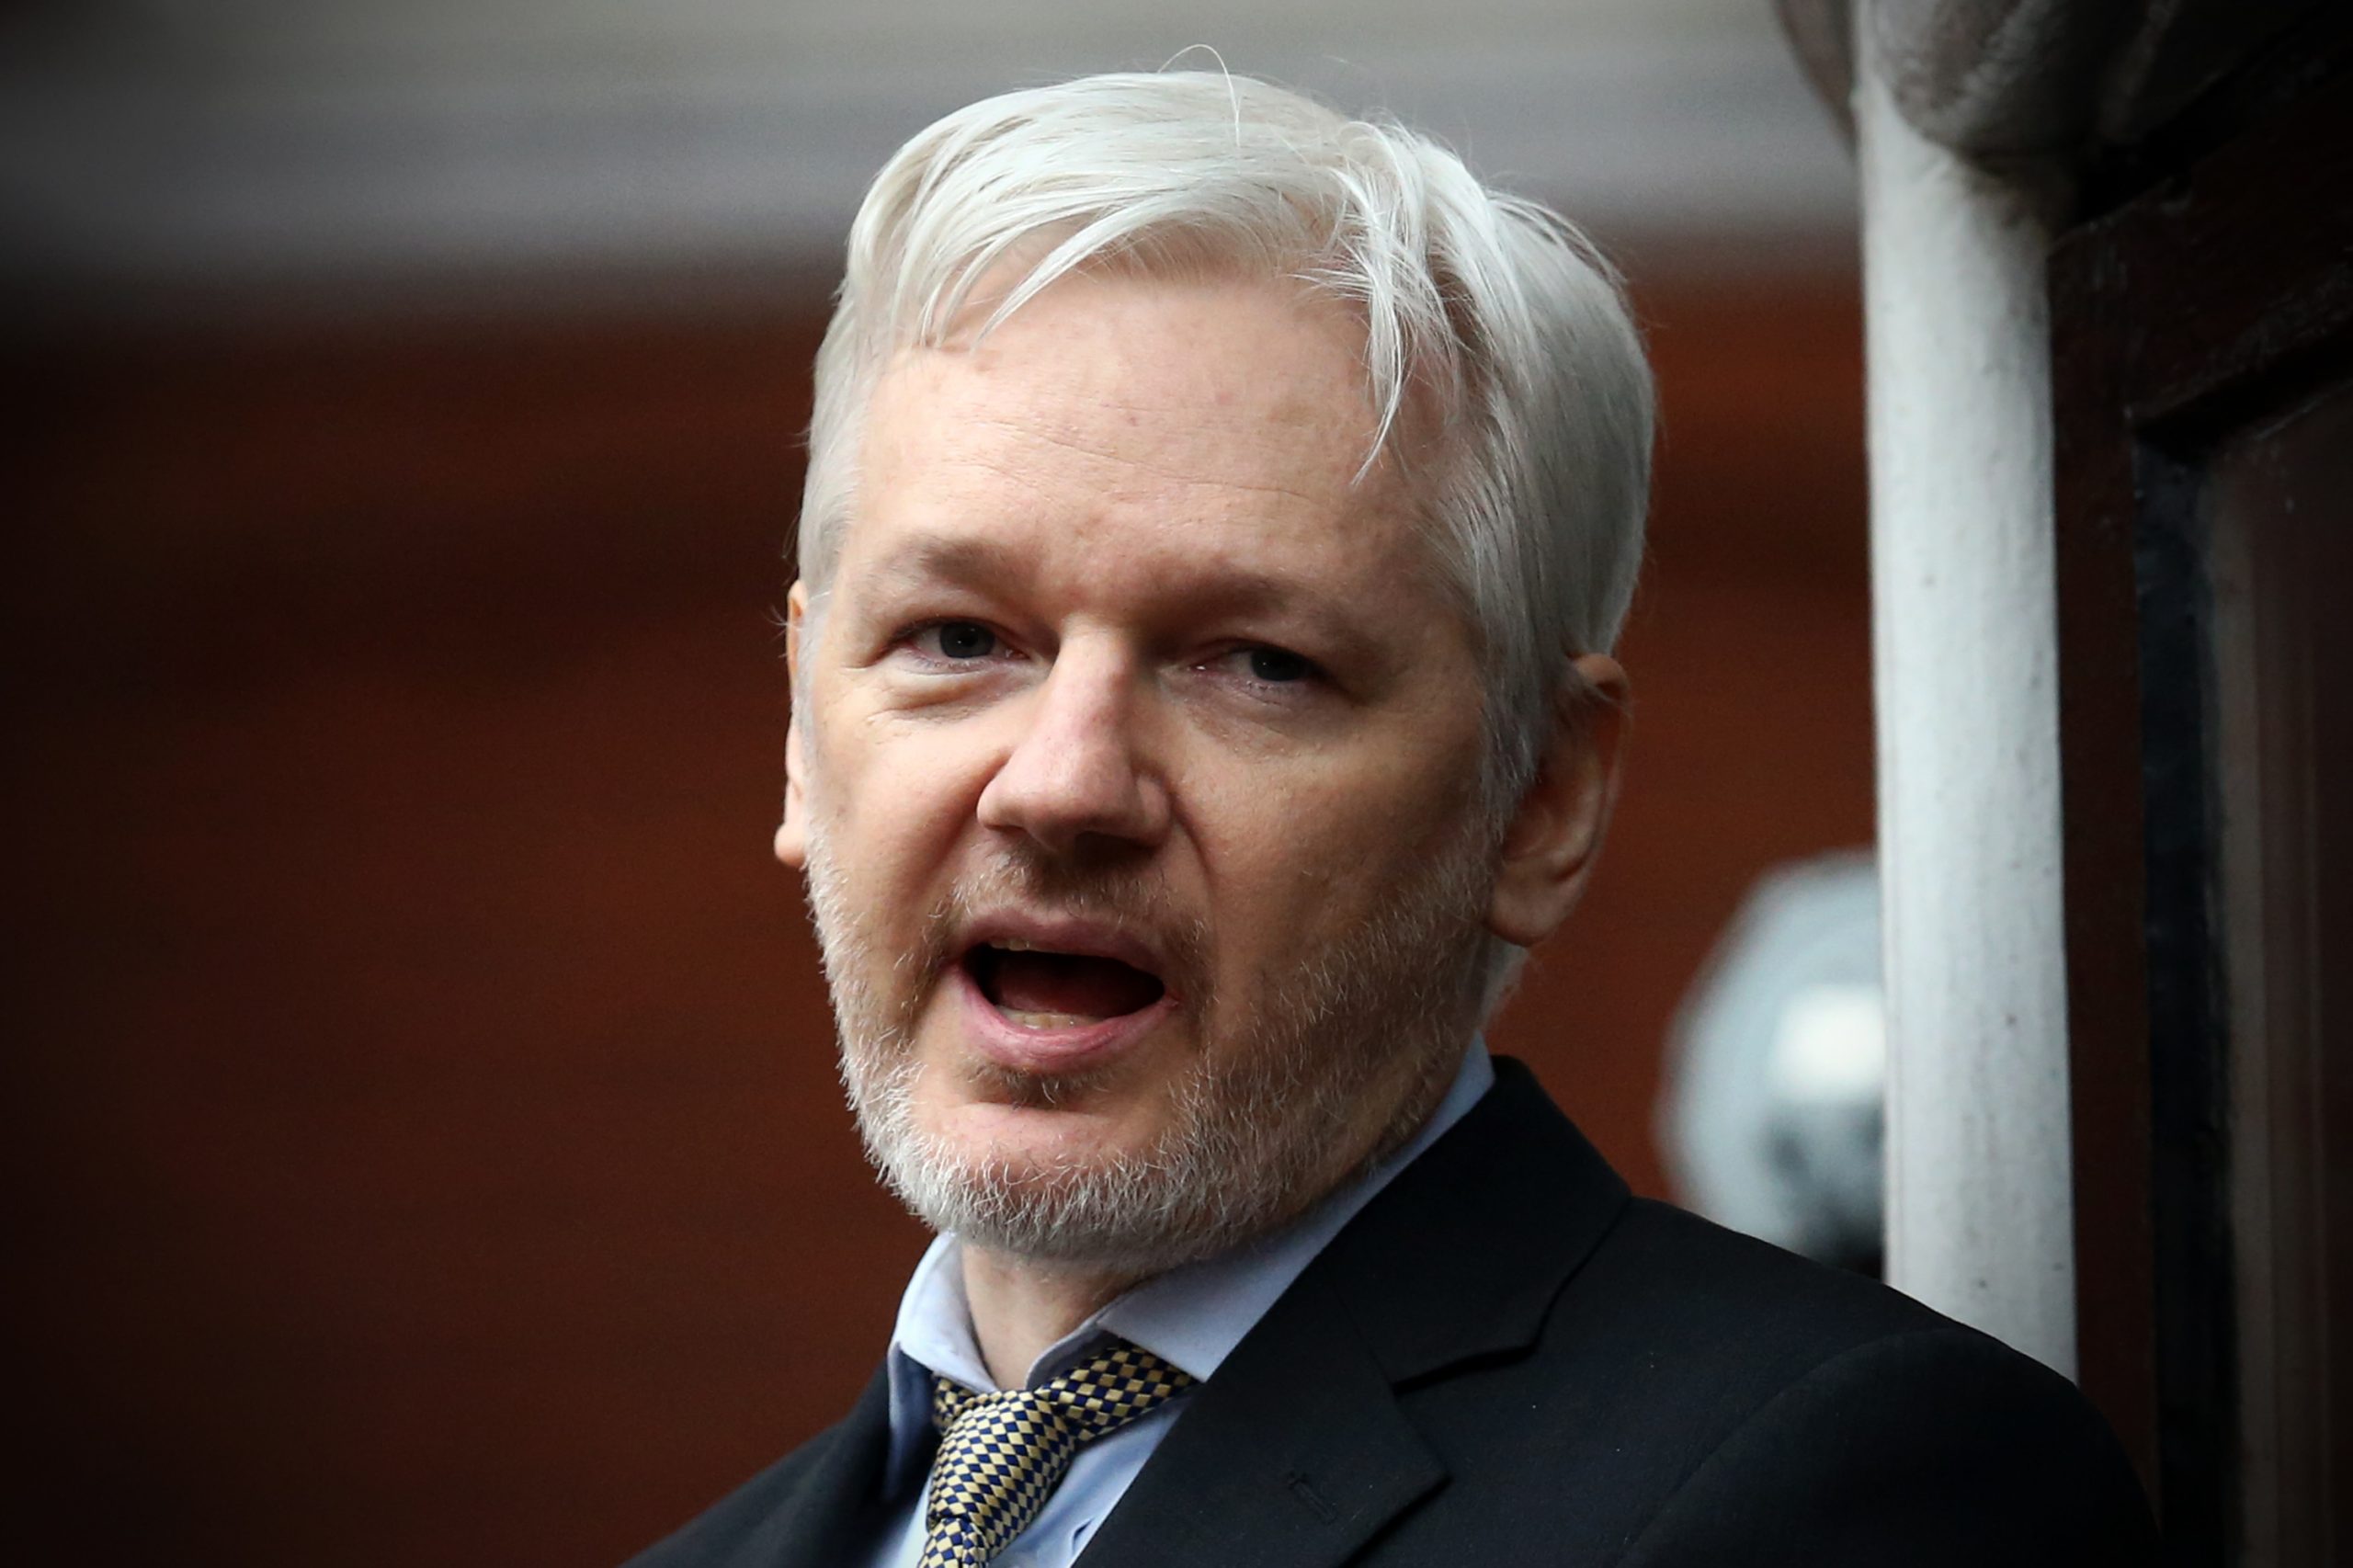 Assange, founder of WikiLeaks, has been denied bail by a London court